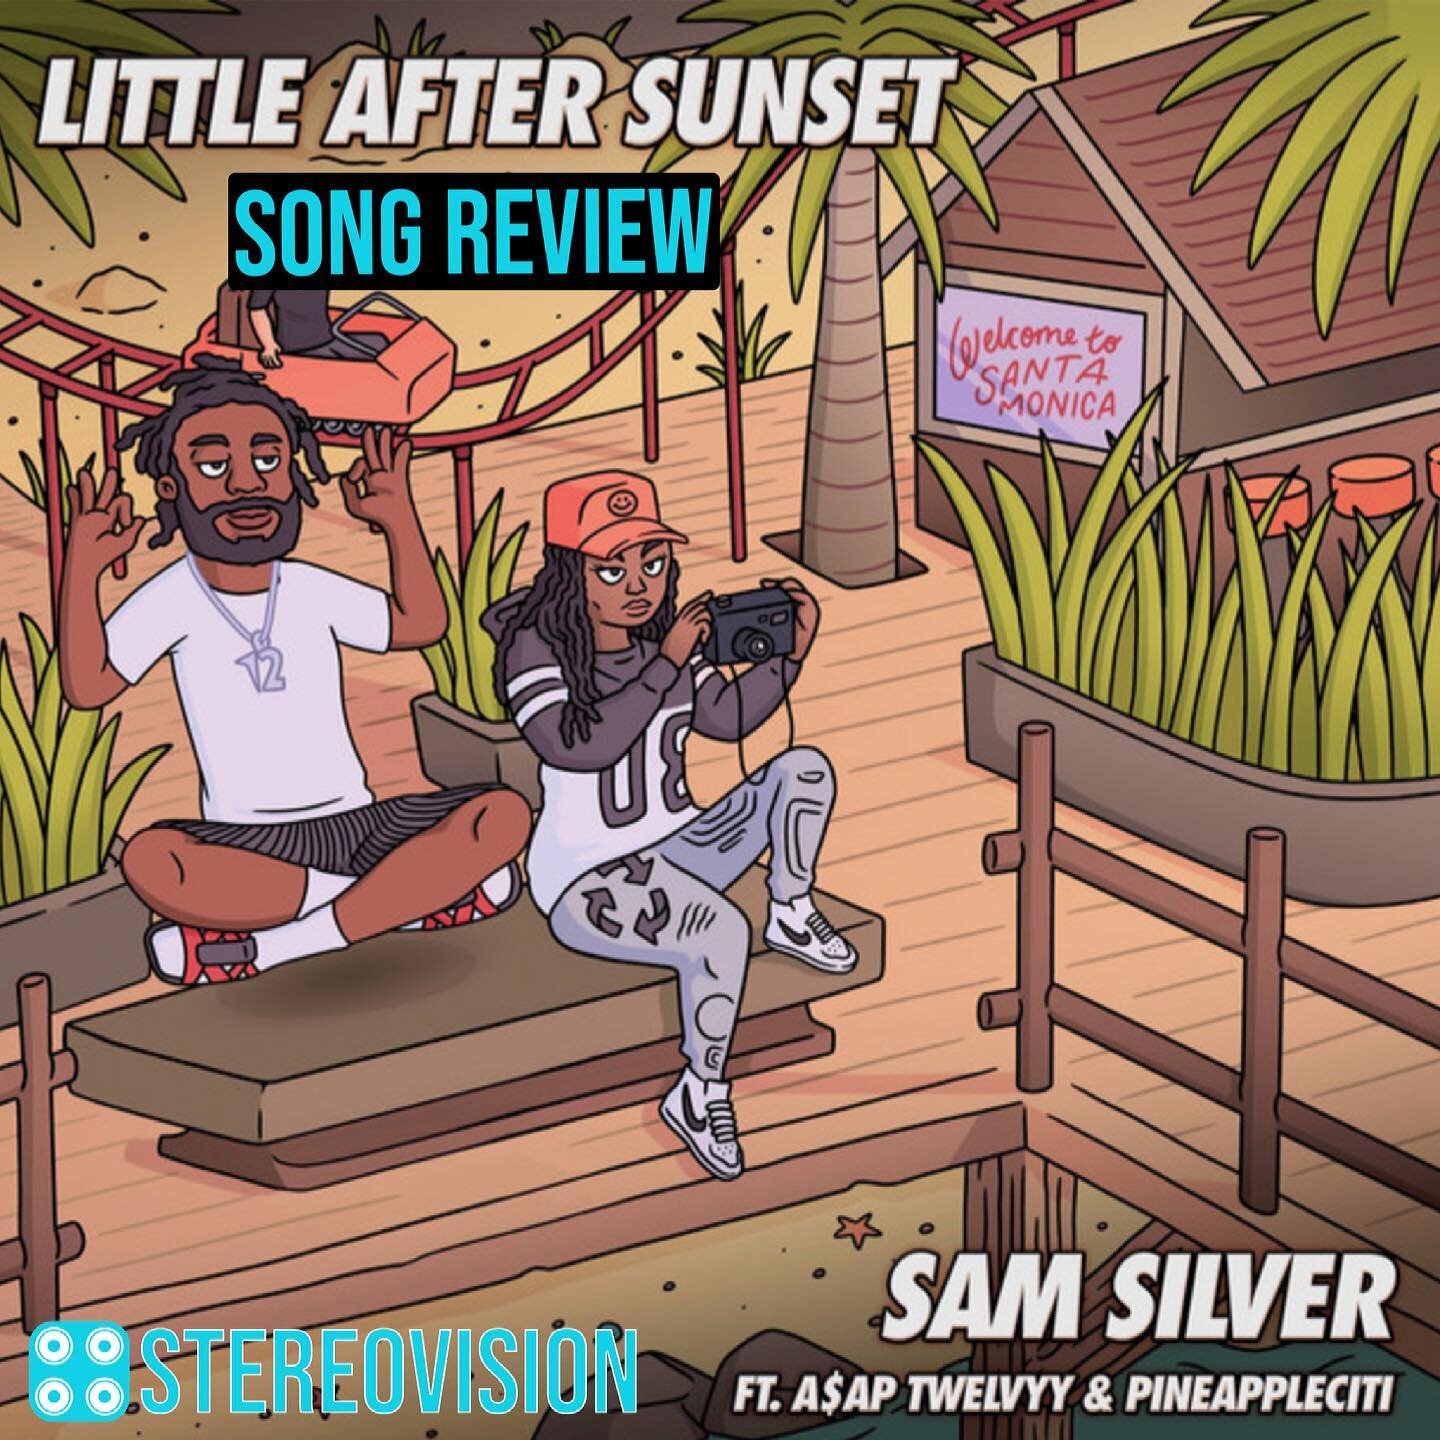 A$AP Twelvyy: &ldquo;Little After Sunset&rdquo; Song Review 💎
Click the link in our bio to read the review and listen to the track! 💯